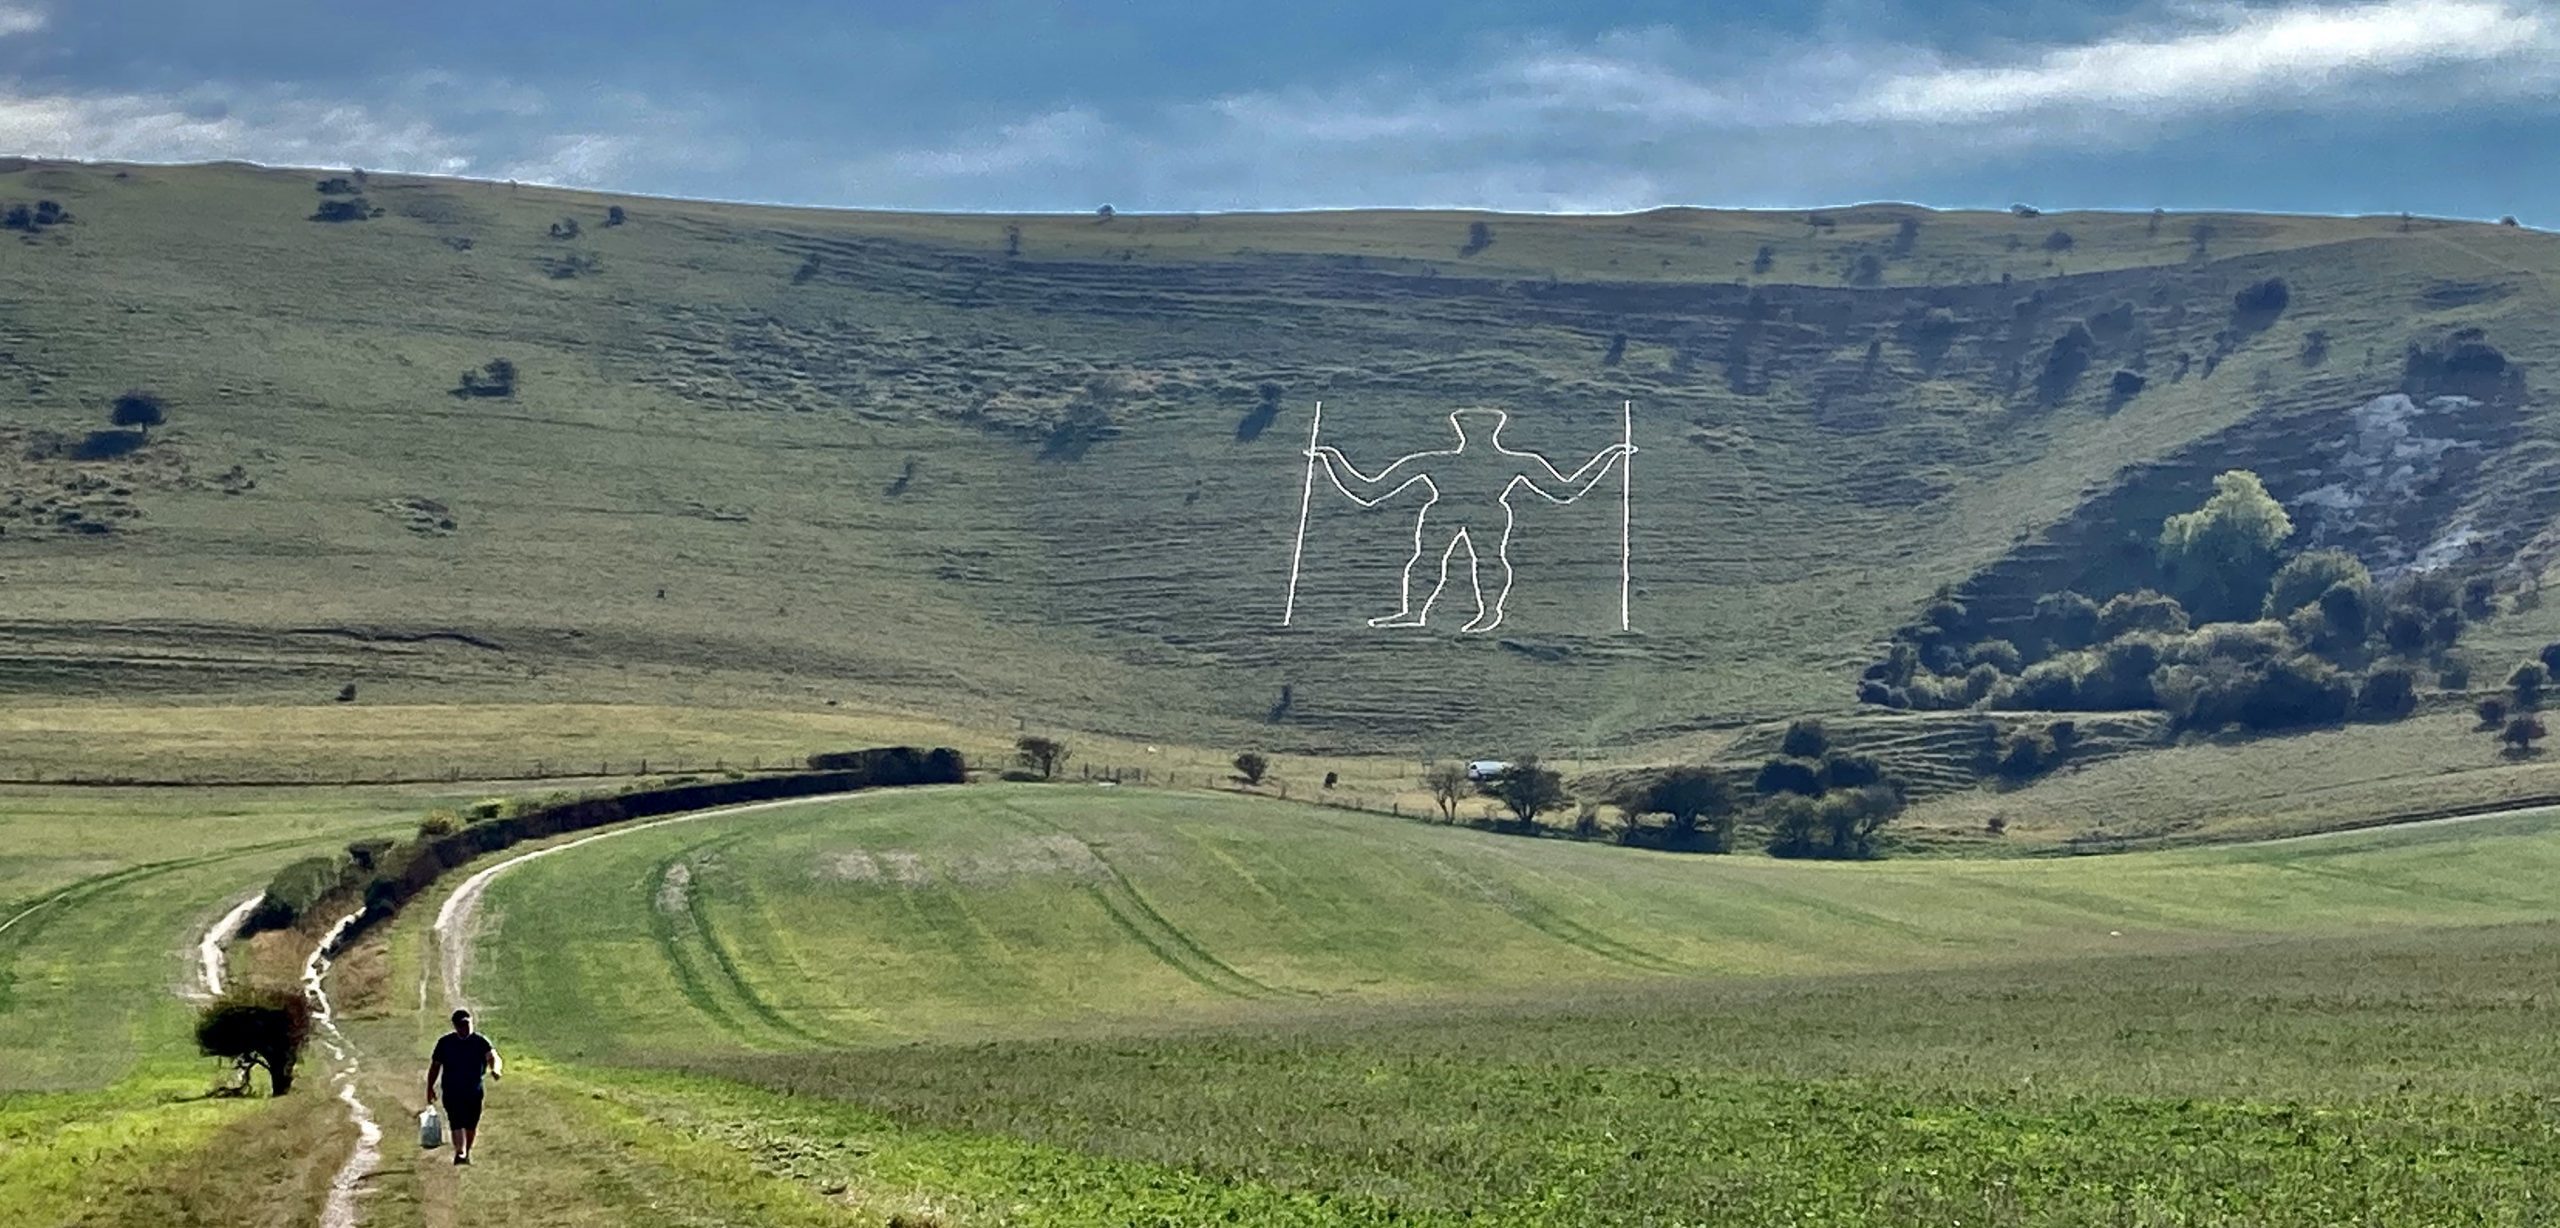 Long Man of Wilmington, cared for by The Sussex Archaeological Society